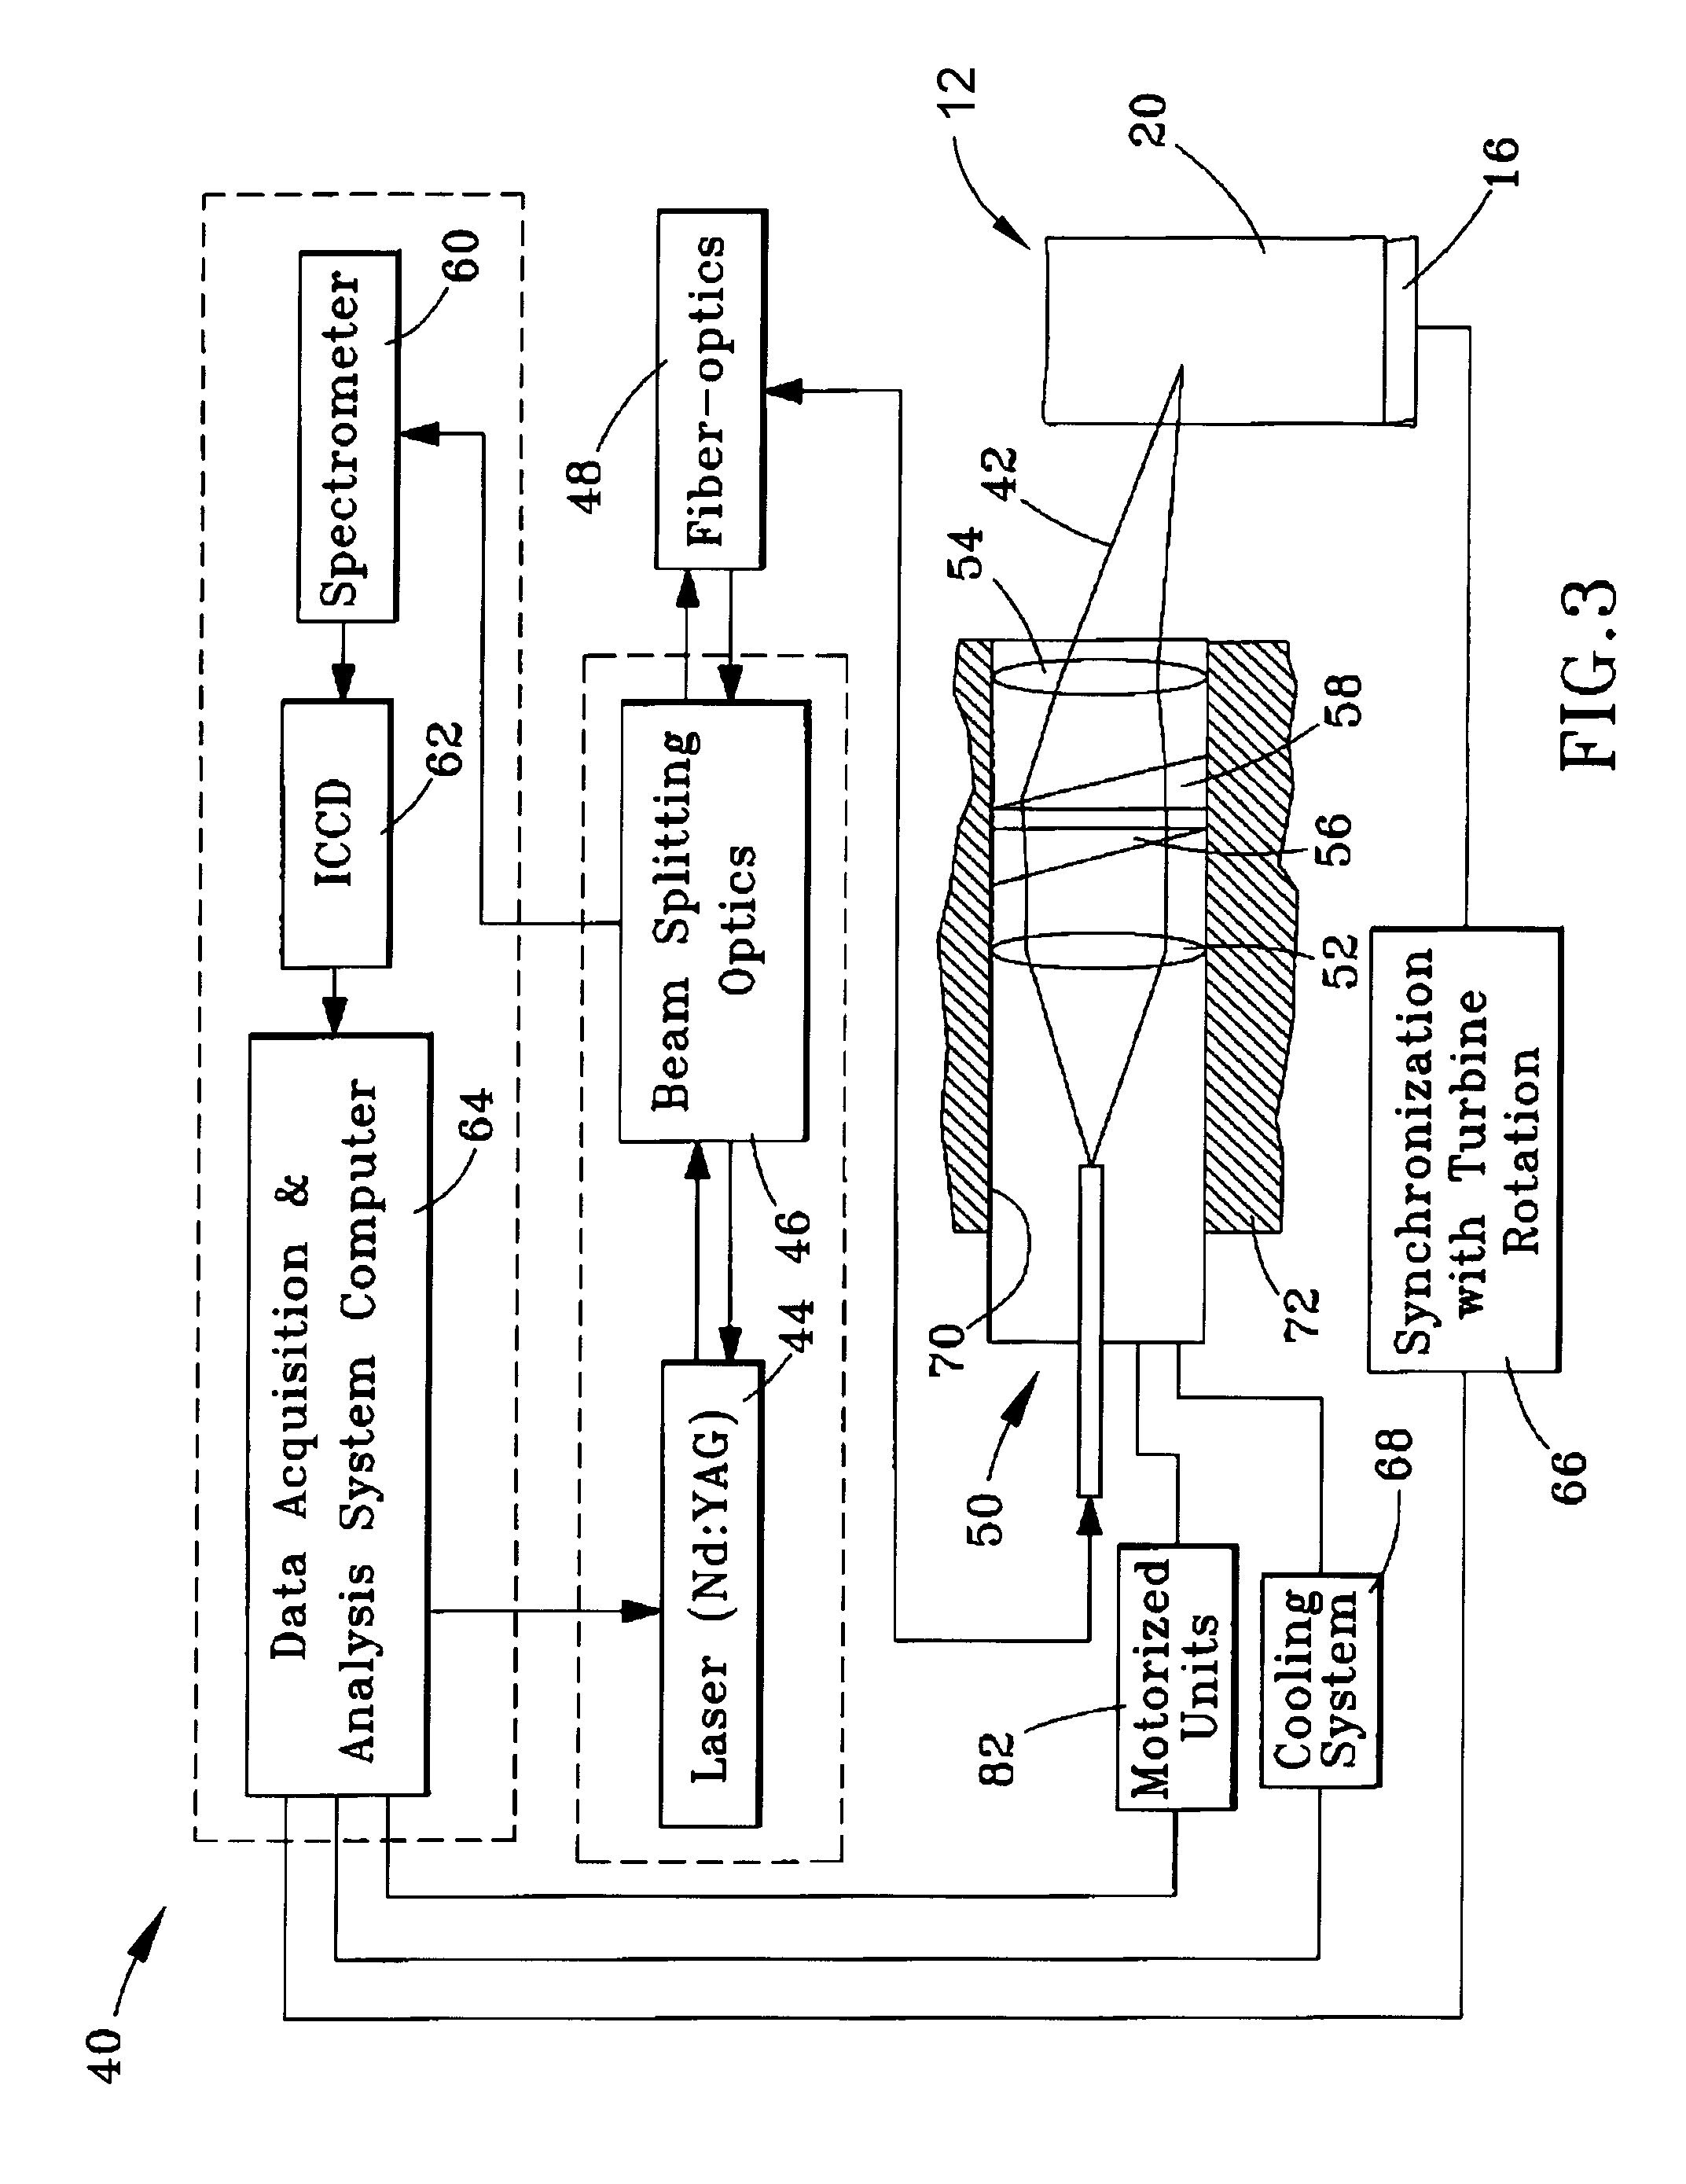 System and method for detecting and analyzing compositions